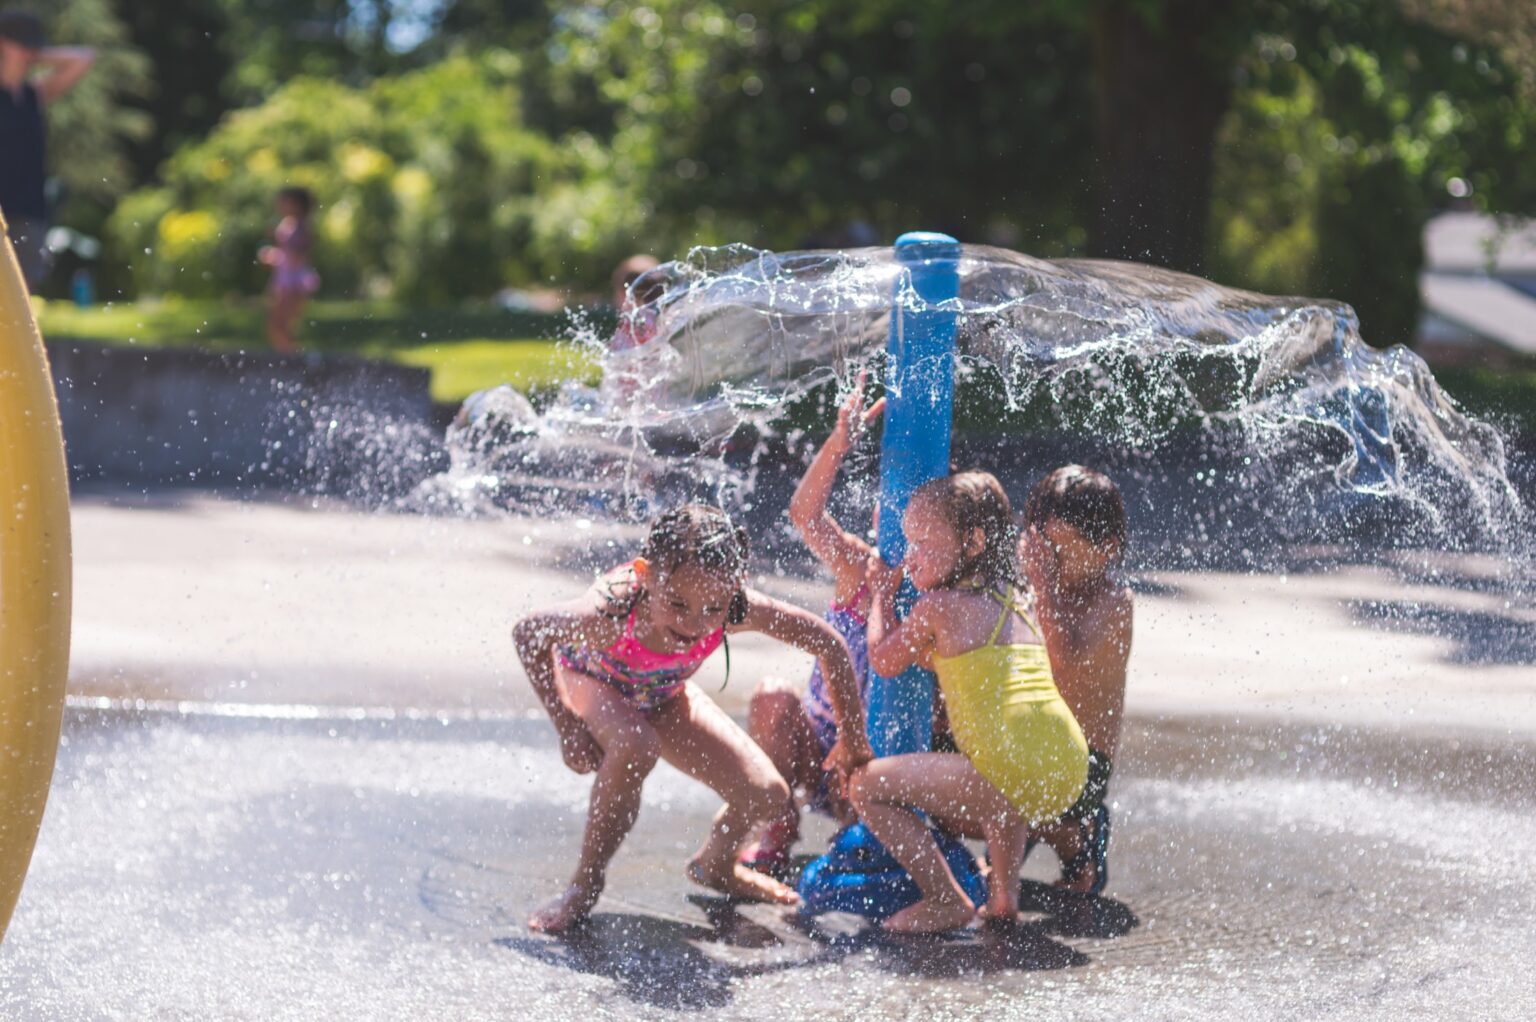 Kids playing in outdoor water features